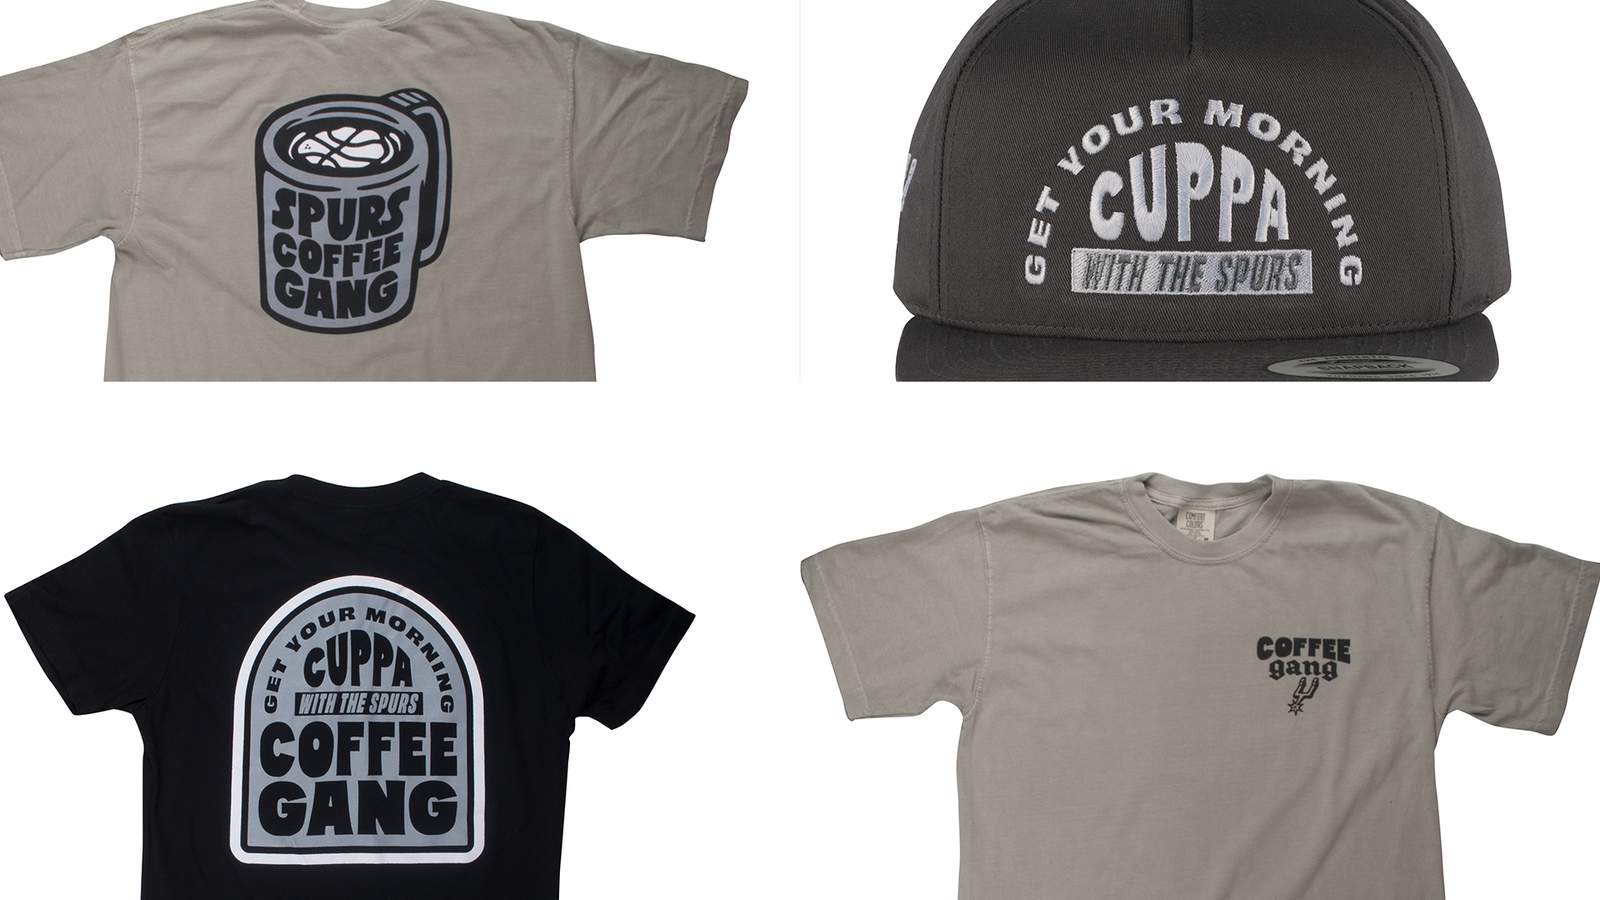 Spurs unveil limited-edition ‘Coffee Gang’ collection with shirts, novelty items for fans